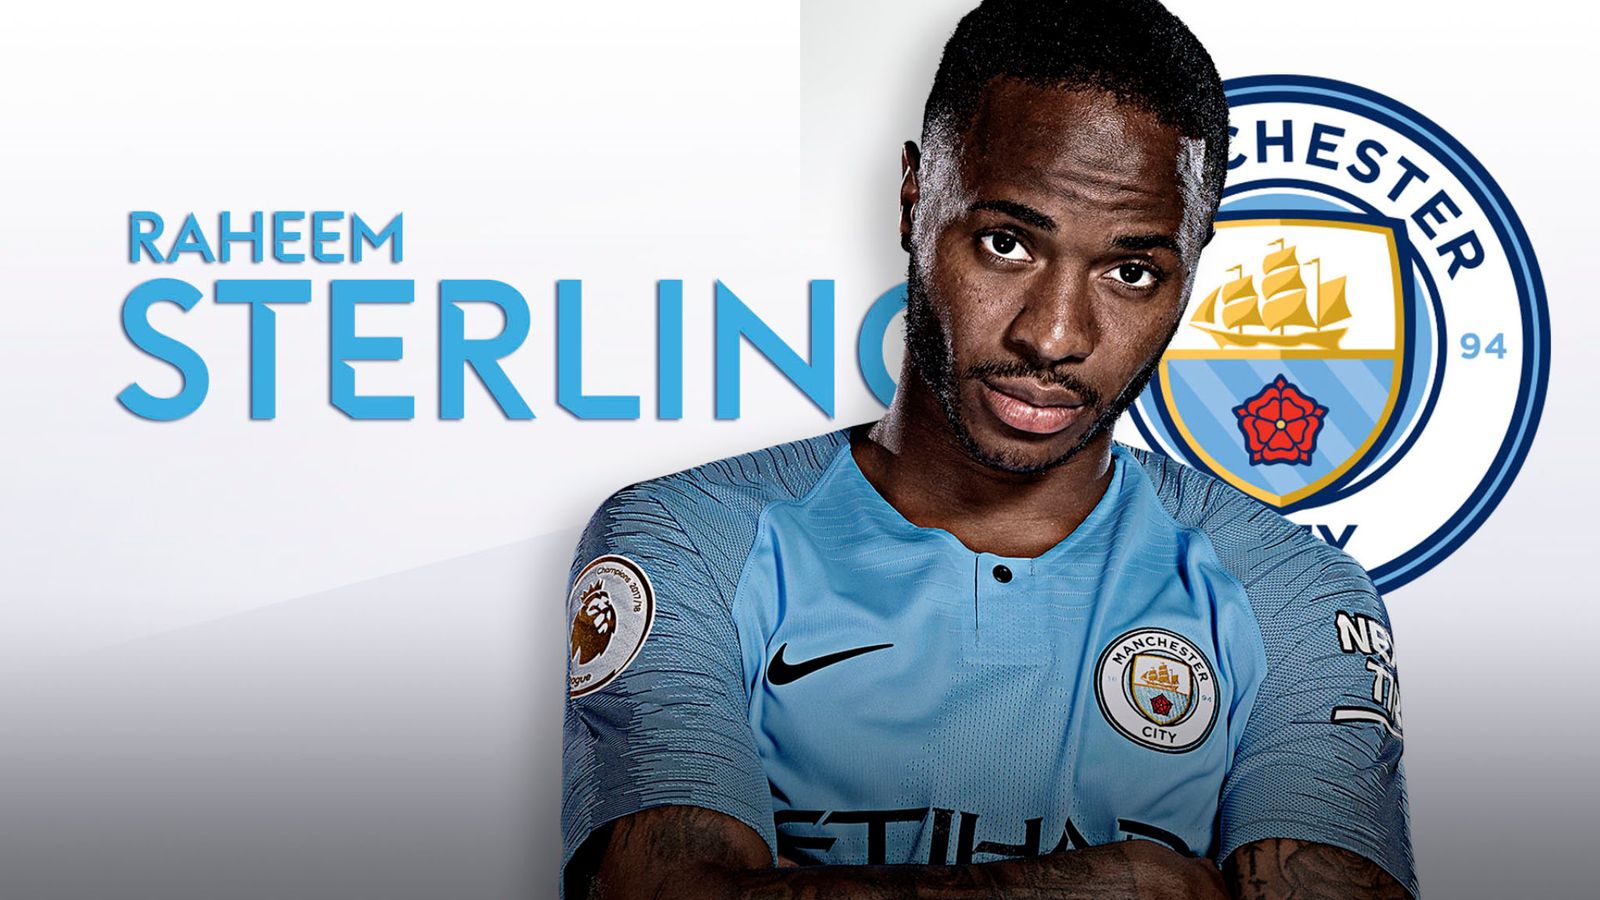 Raheem Sterling In Contention For 2018/19 Player Of - Raheem Sterling Player Of The Year , HD Wallpaper & Backgrounds